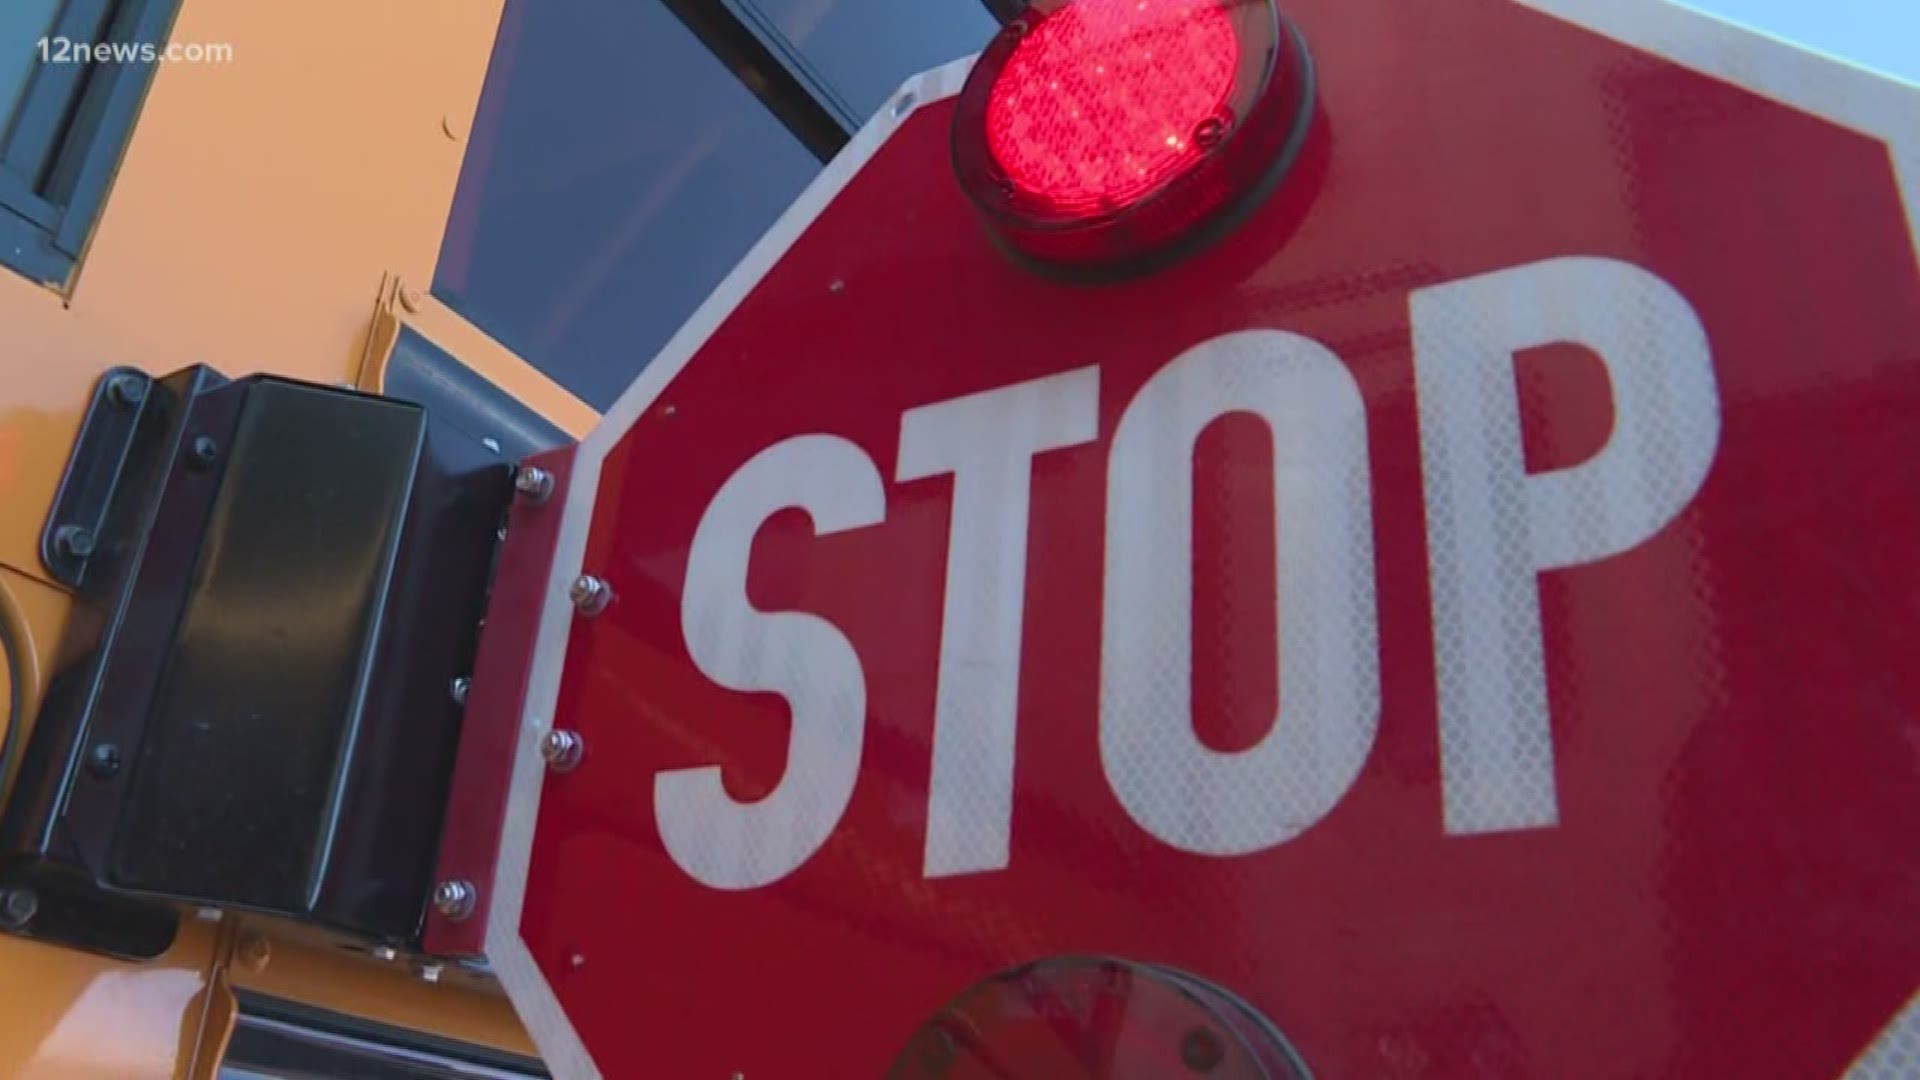 Plenty of drivers are ignoring the stop sign on school buses, despite a law that is clear that drivers must stop. A handful of school districts in the Valley have made the investment to install cameras on buses, but the districts are having a hard time enforcing the law.